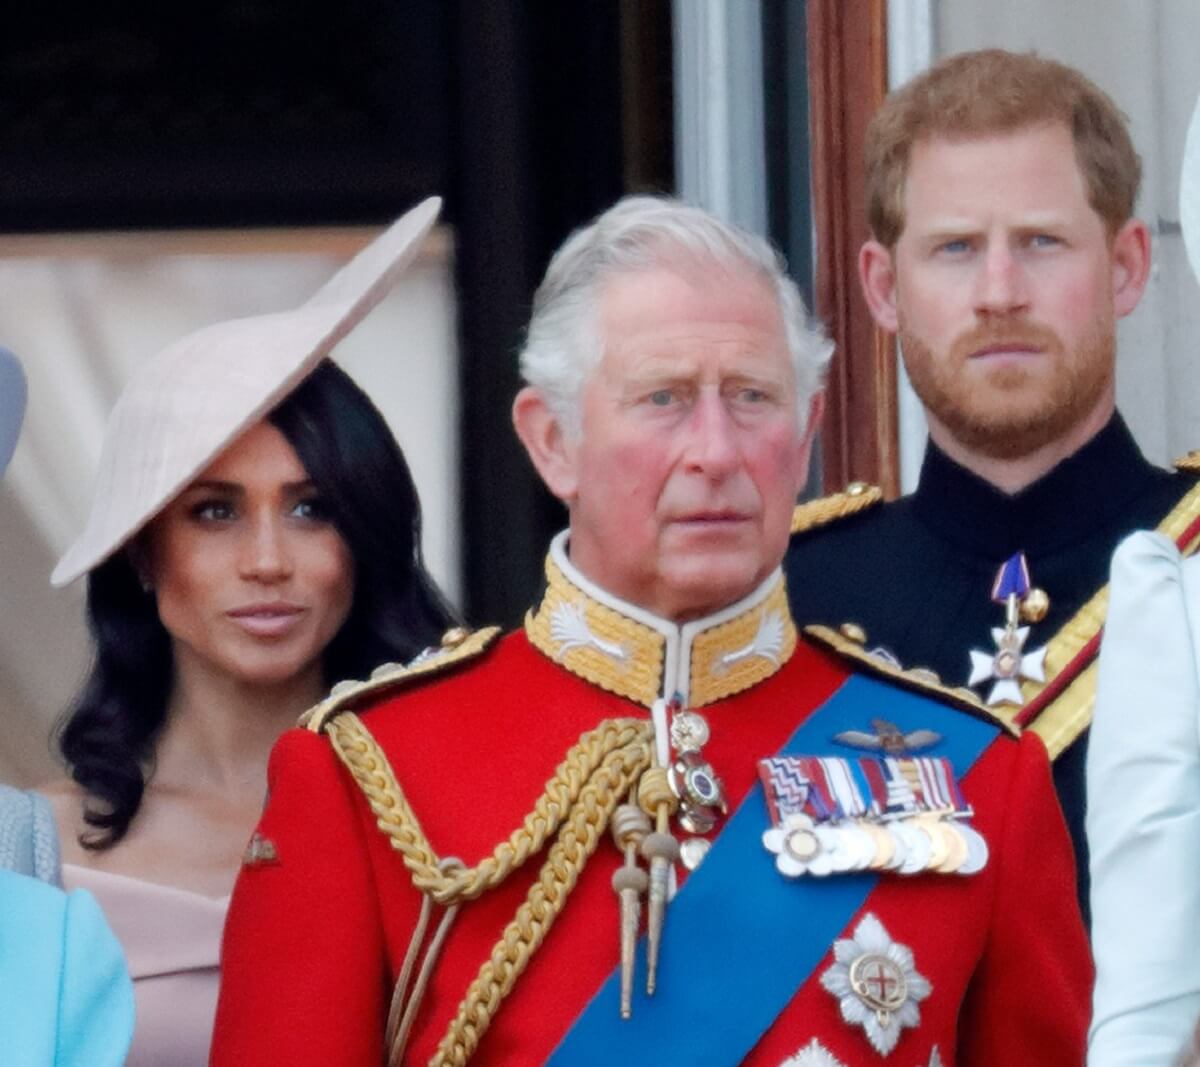 Meghan Markle, King Charles III, and Prince Harry standing on the balcony of Buckingham Palace during Trooping The Colour 2018